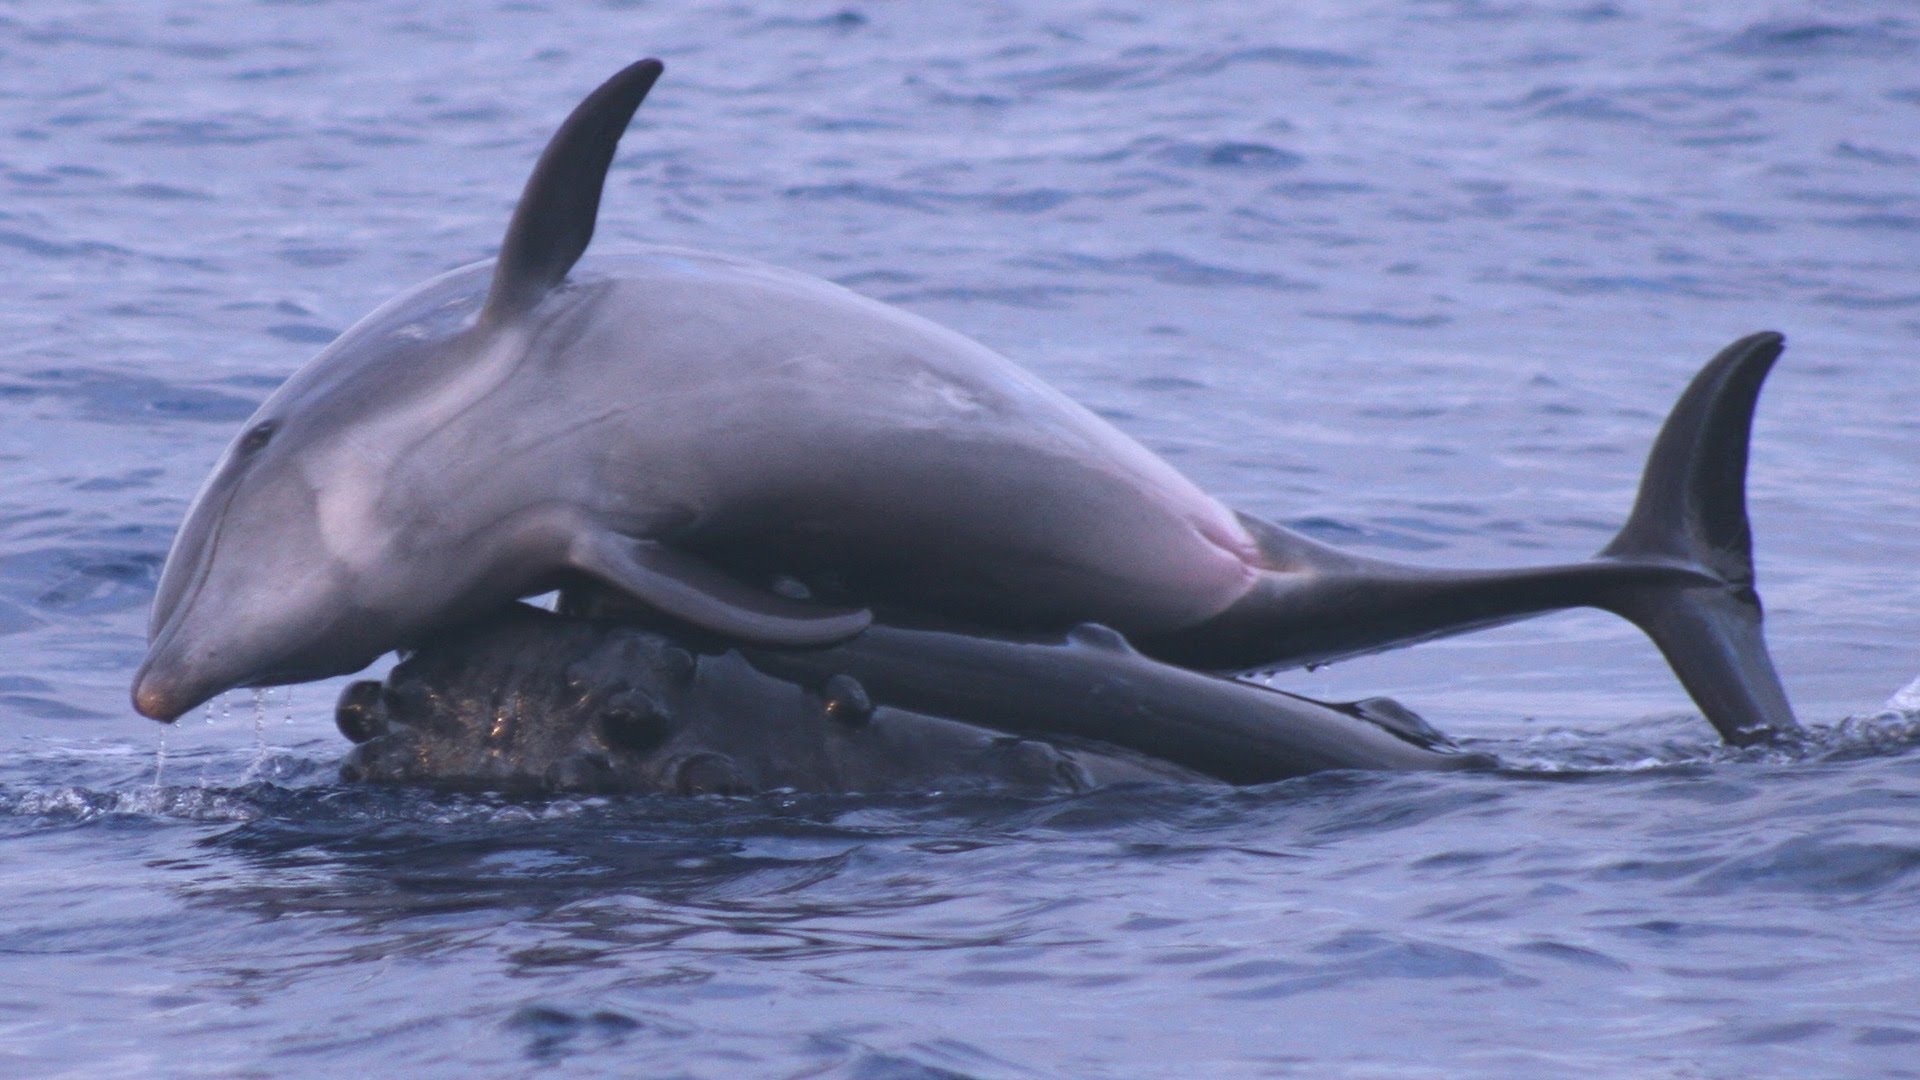 Whales let dolphins ride on their head for fun.